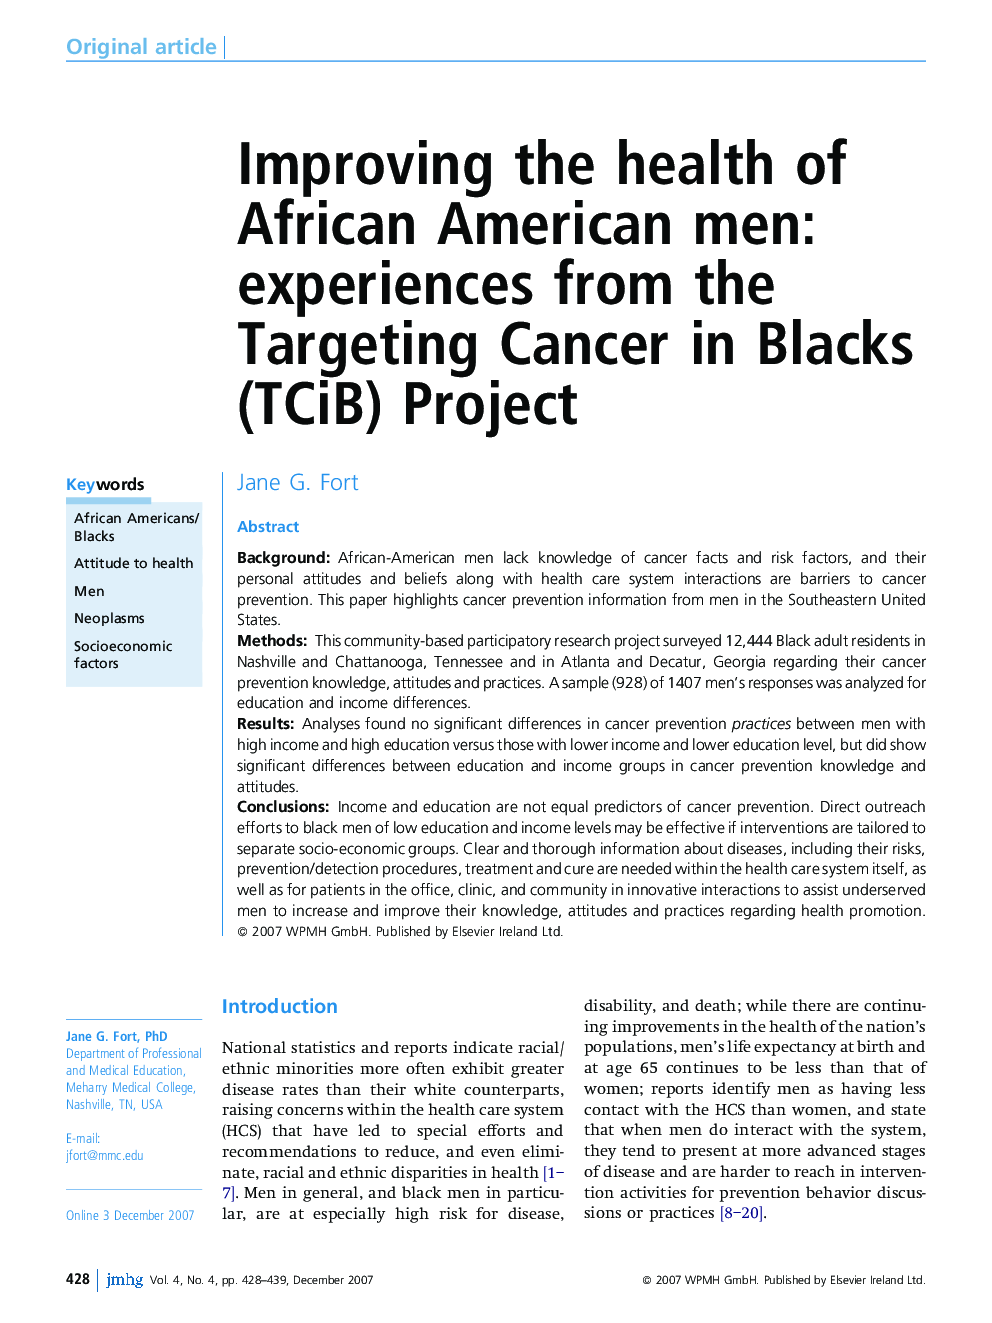 Improving the health of African American men: experiences from the Targeting Cancer in Blacks (TCiB) Project